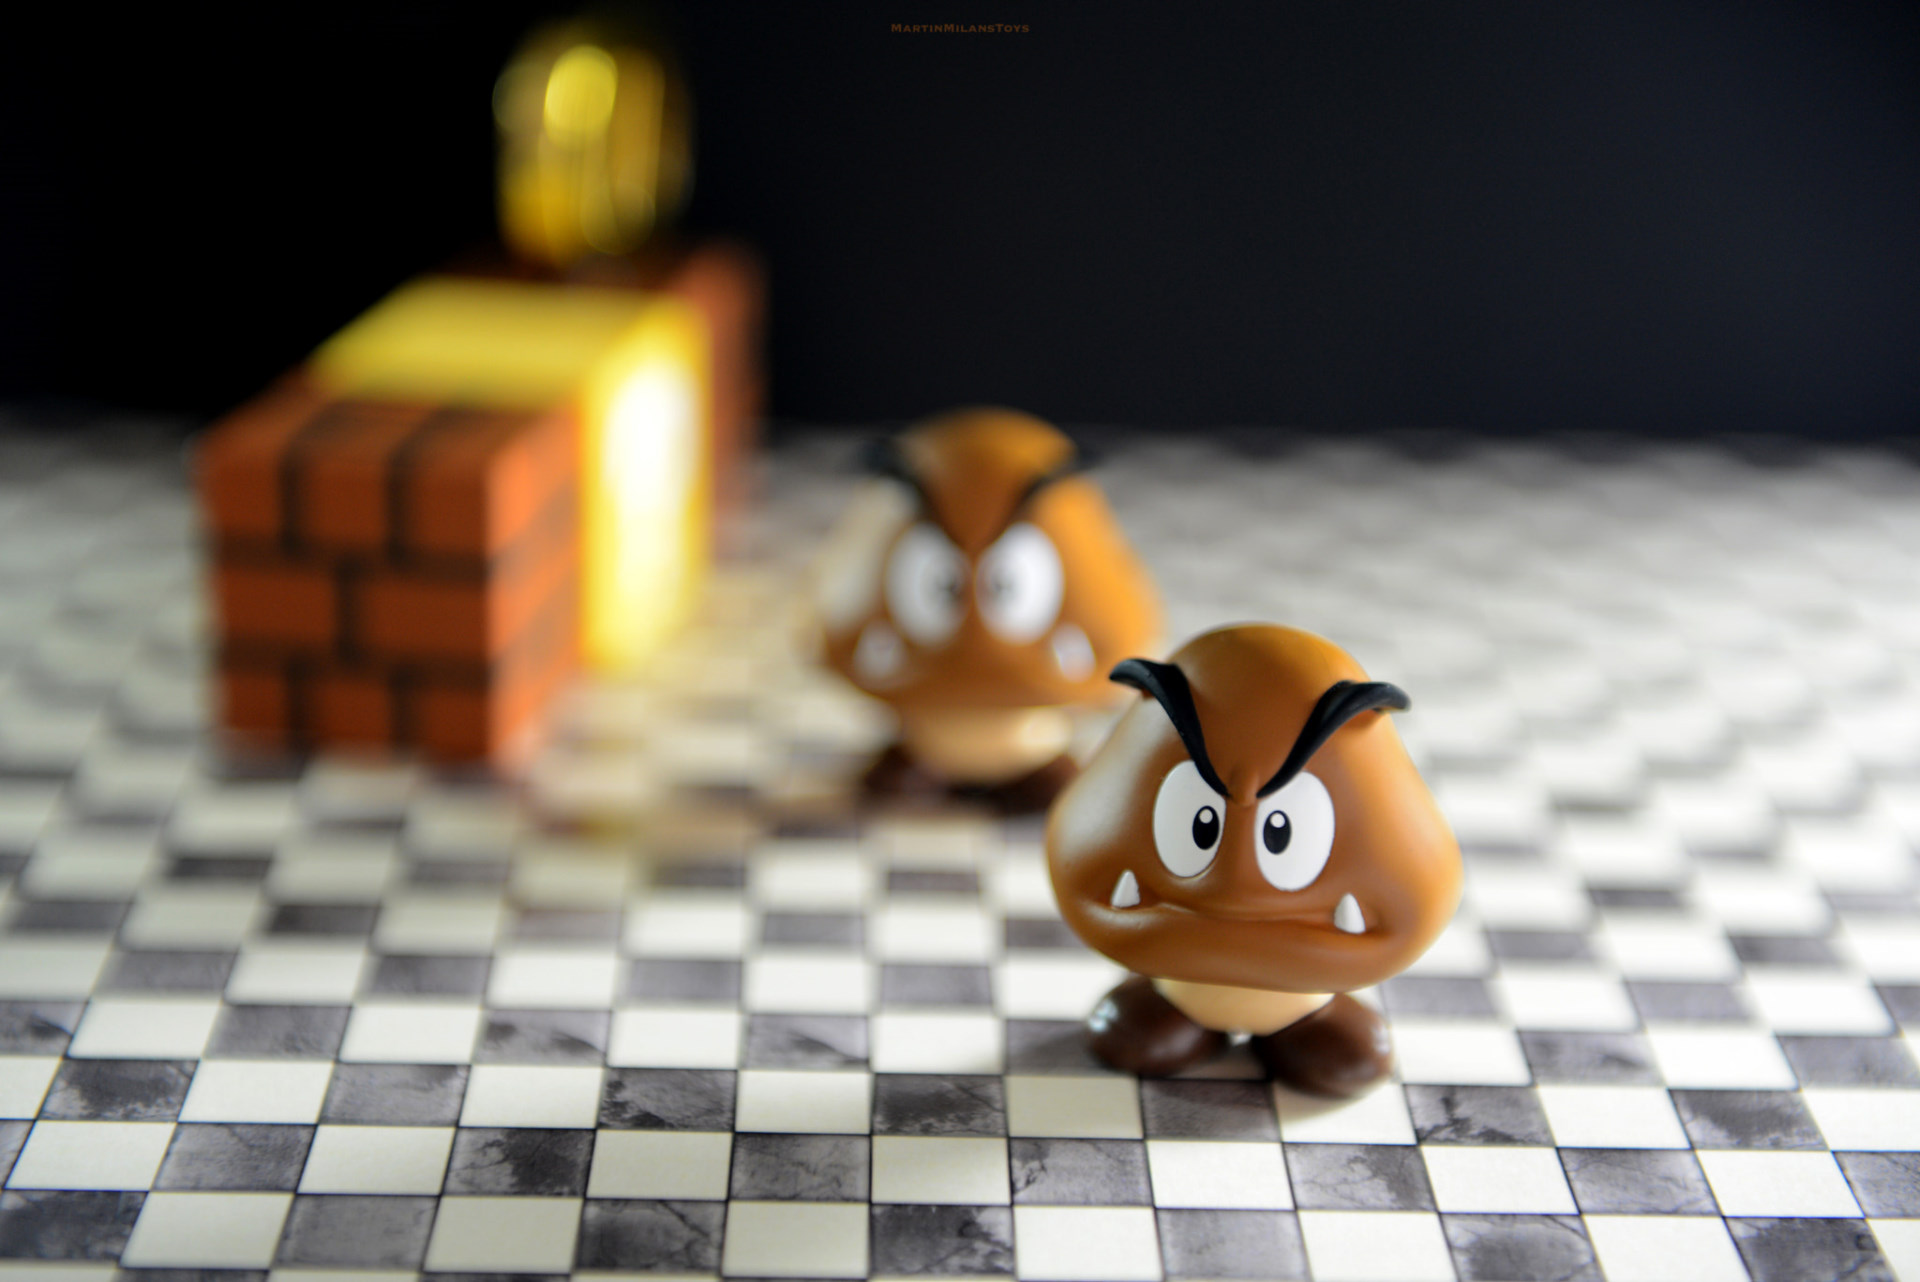 General 1920x1282 toys video games 500px chessboard video game characters depth of field checkered bricks Super Mario